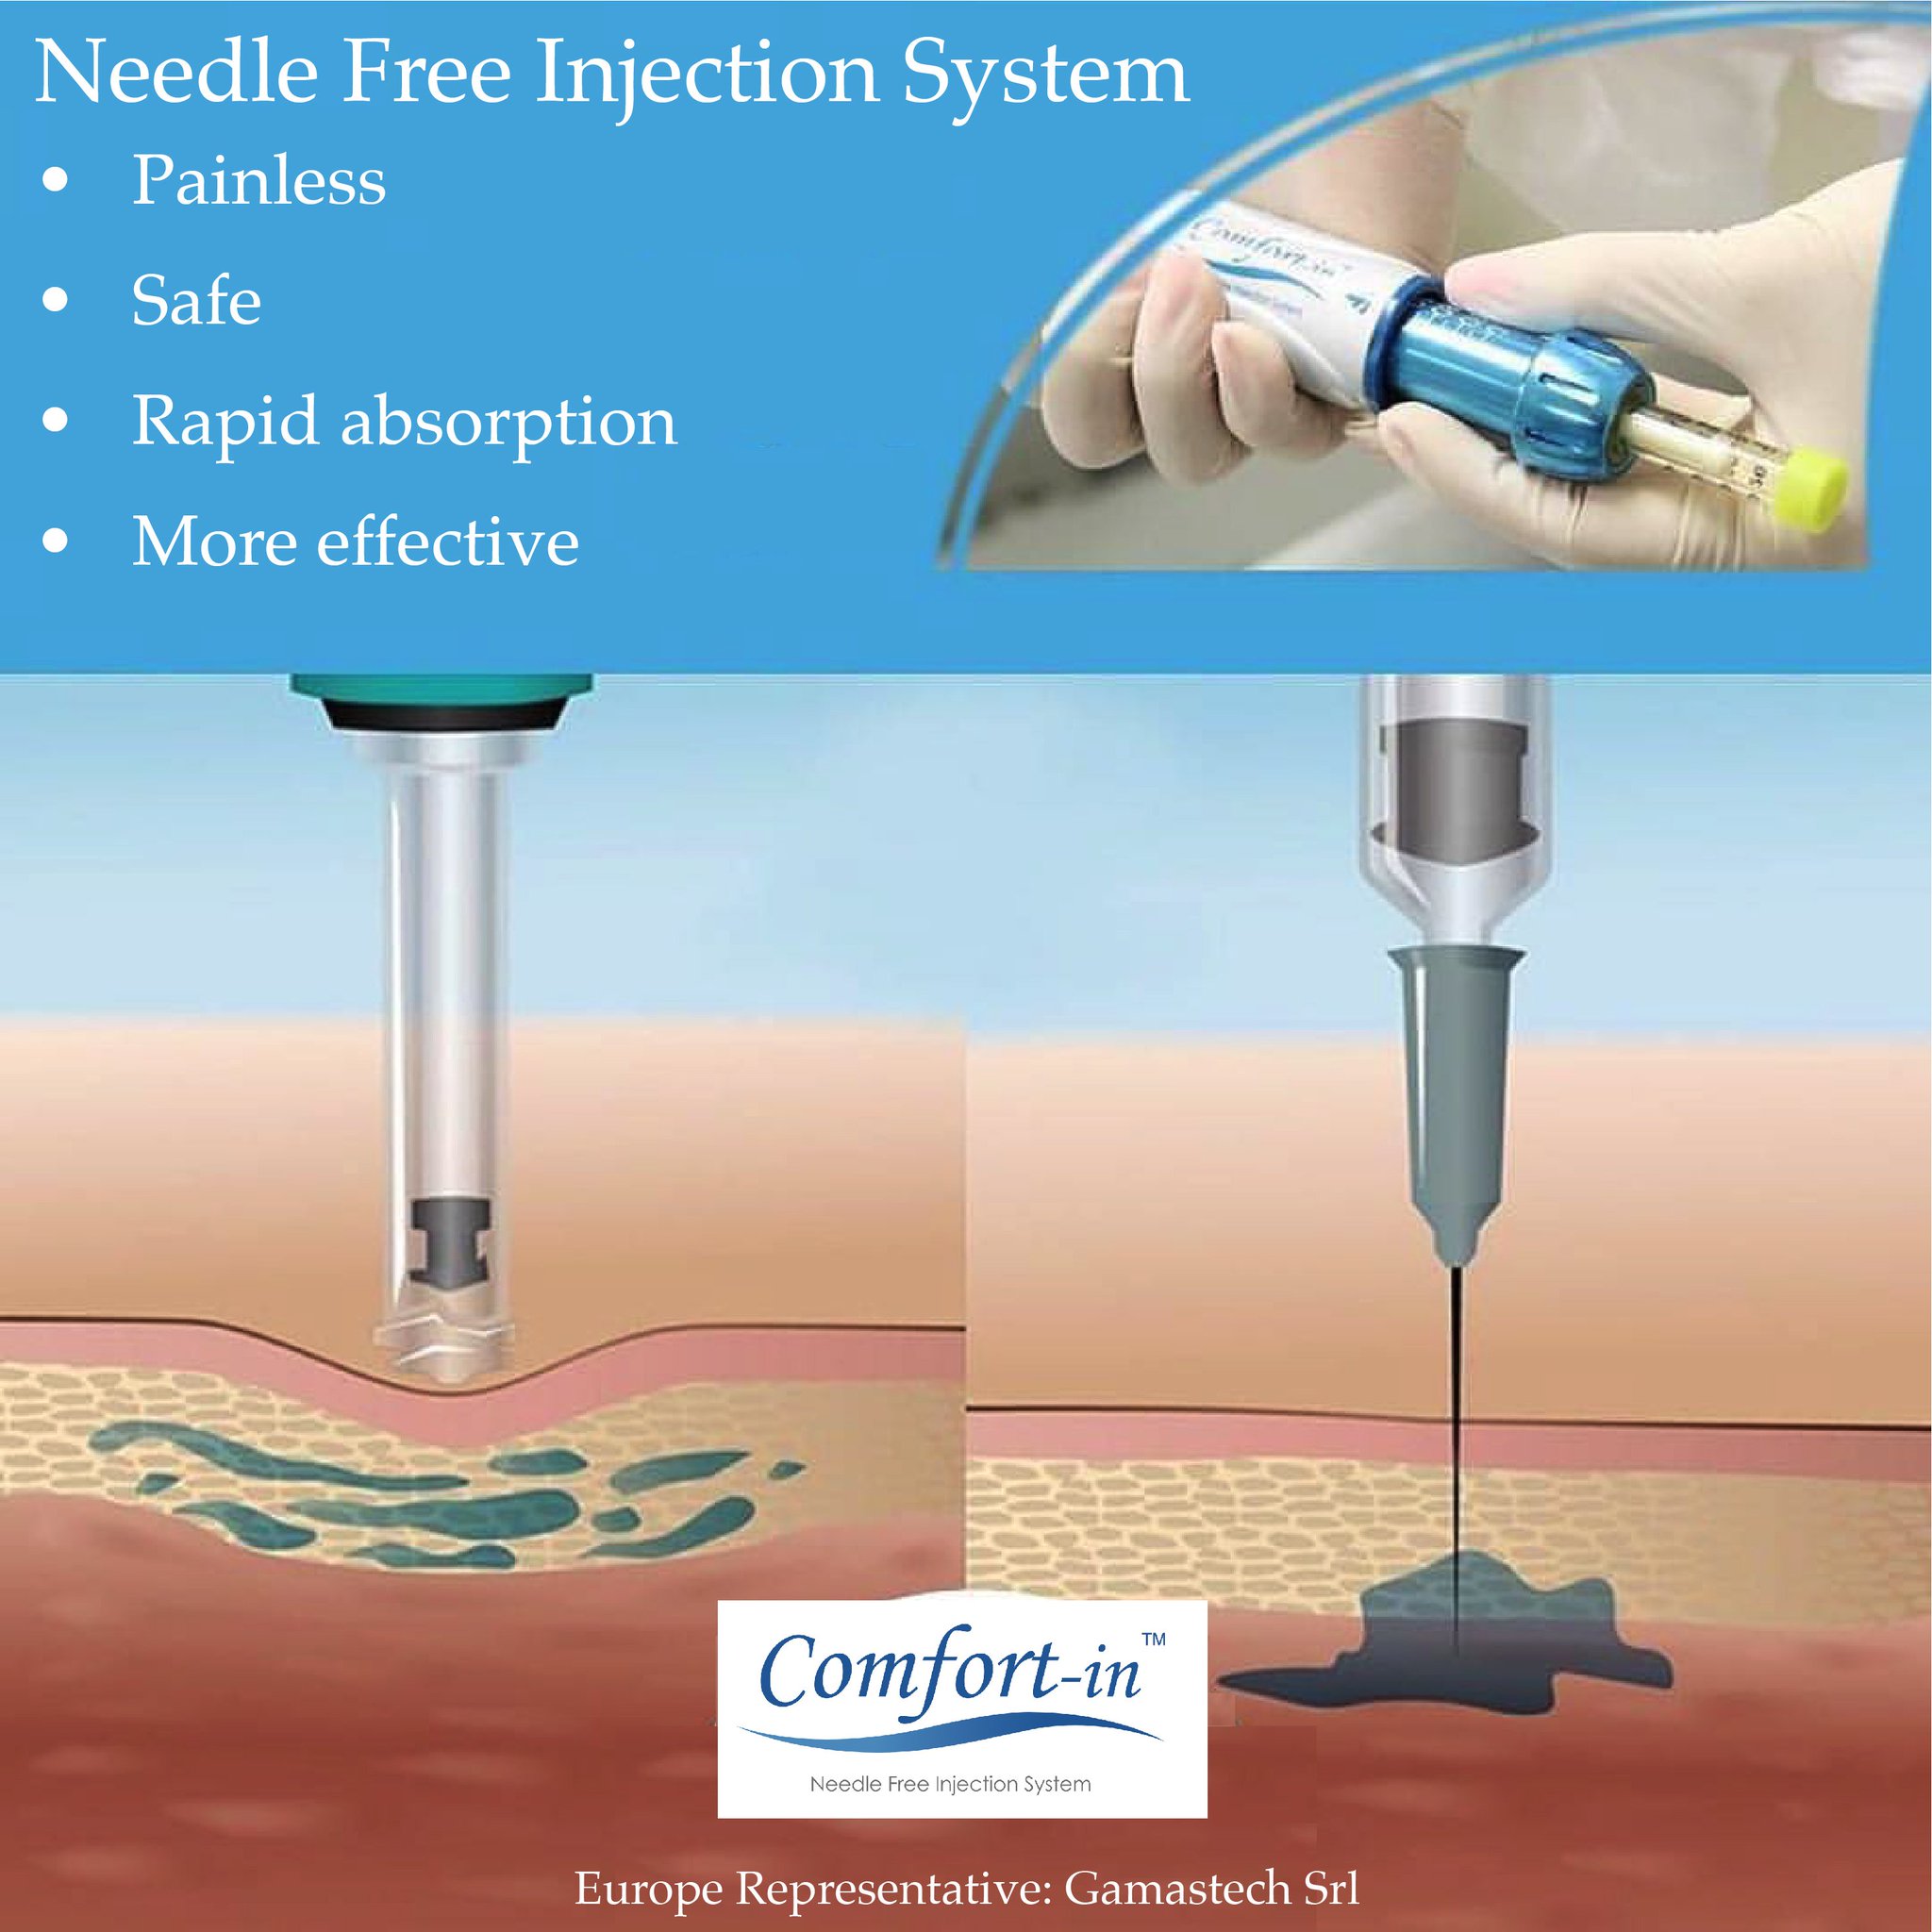 Comfort-in on X: Comfort-in, the most Advanced Infusion System.   #NeedleFree #painFree #Comfortin #safe #timesaving  #moderndentist  / X